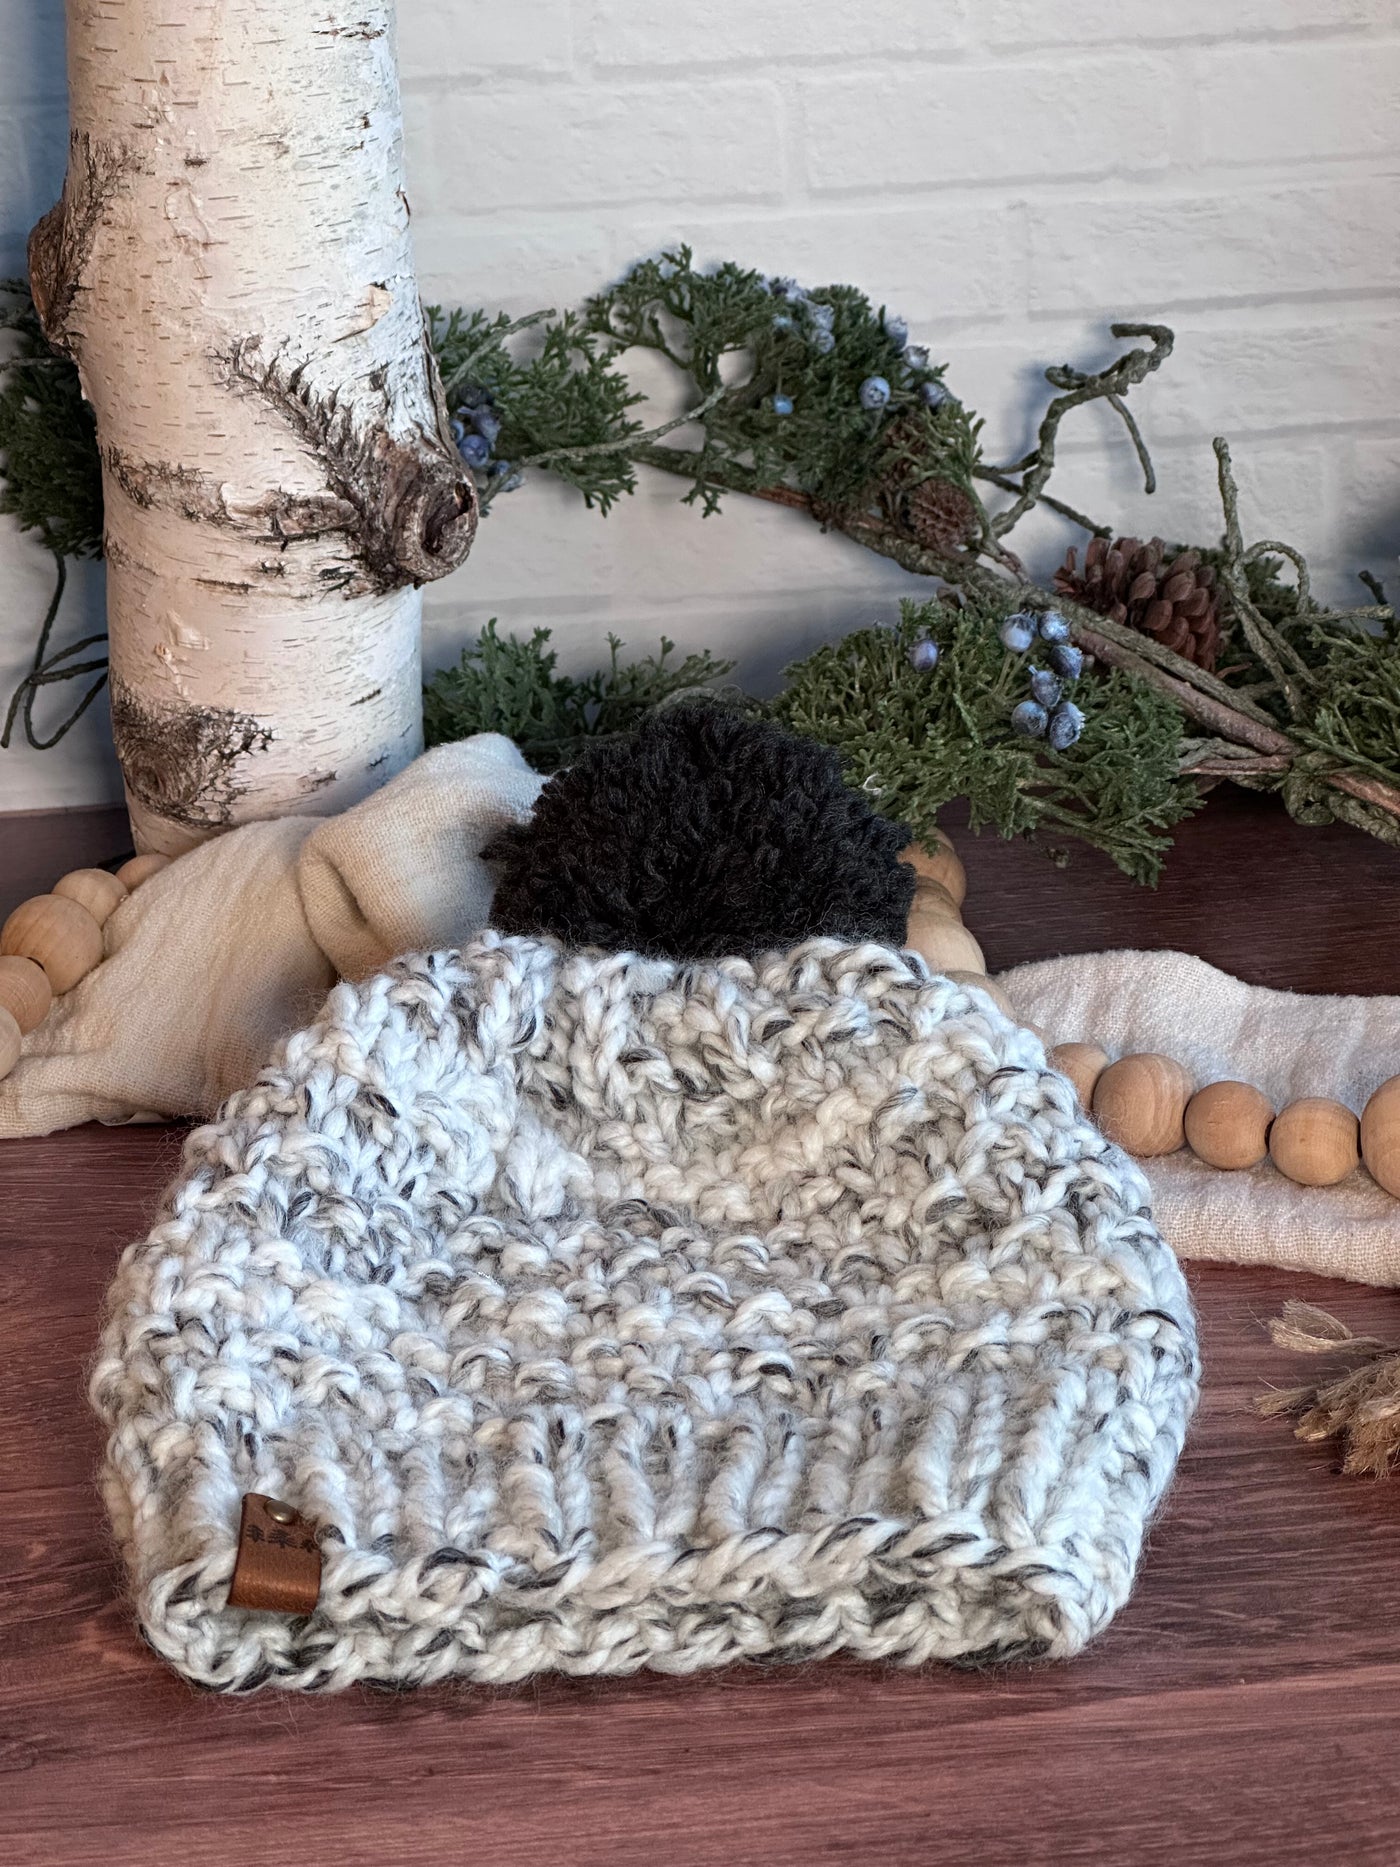 chunky knit handmade hat in grey and white with a black yarn removable Pom Pom